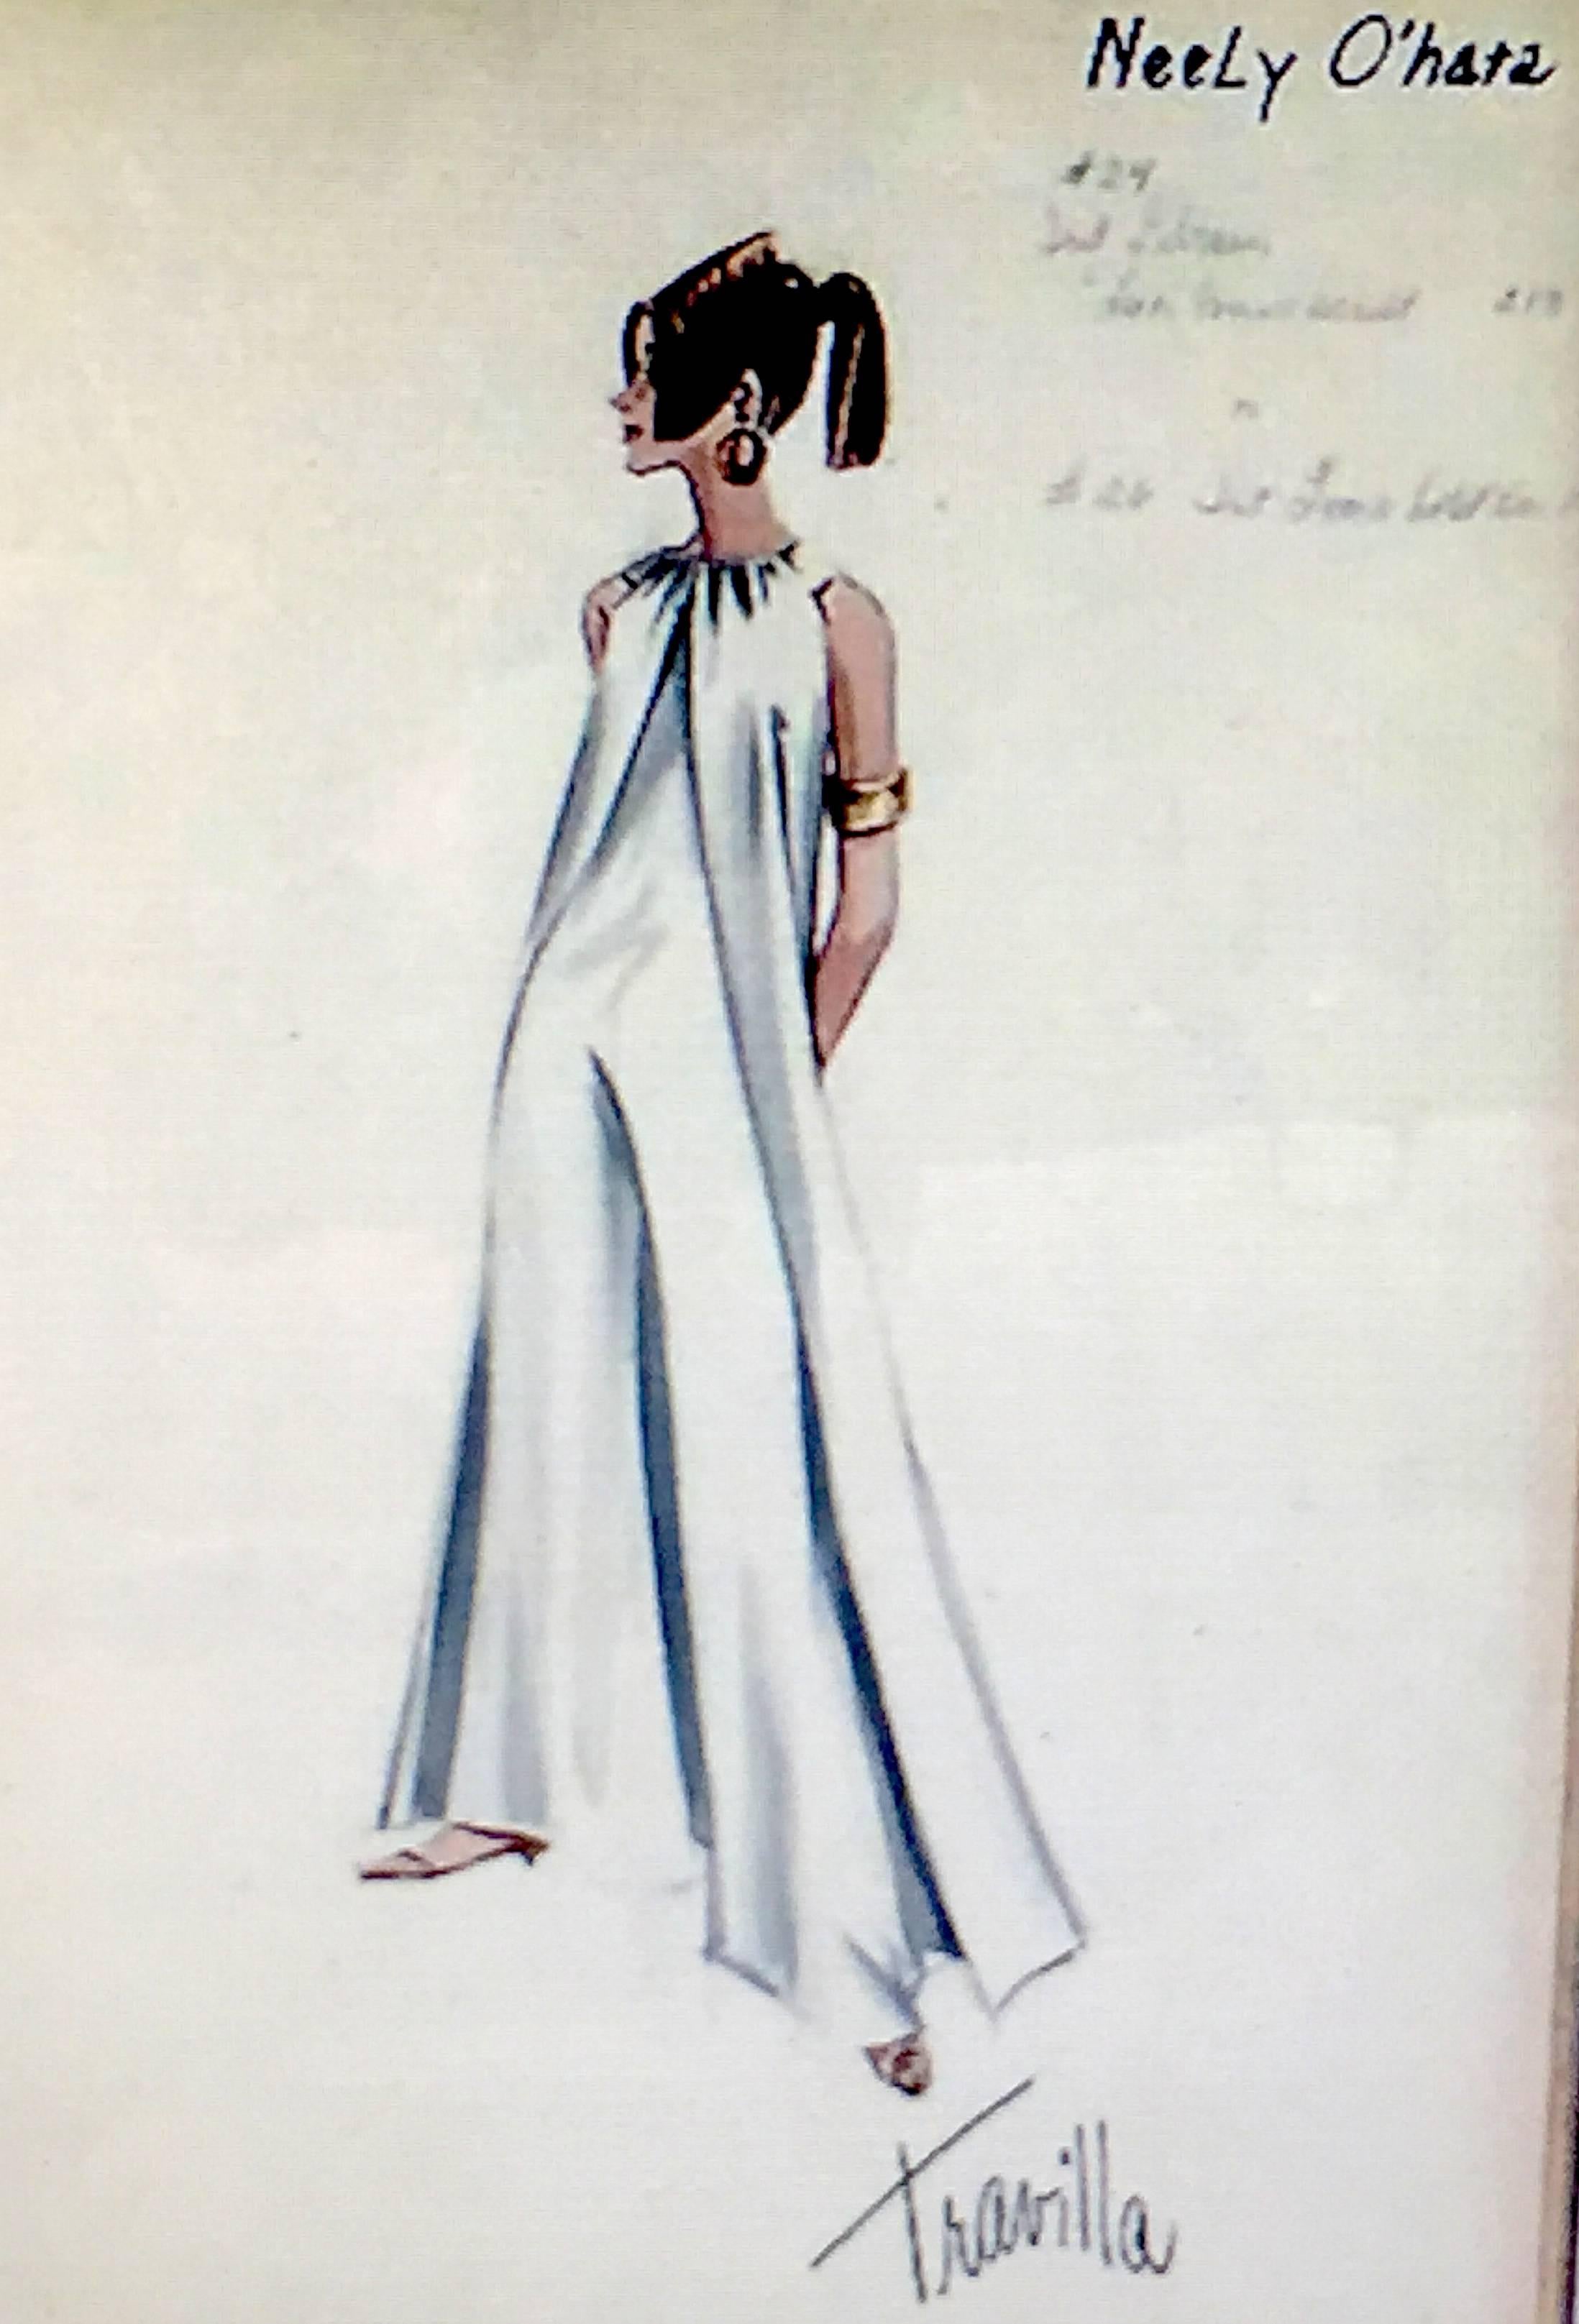 Amazing jeweled jumpsuit with attached cape from William Travilla's costumes from the hit cult movie Valley of the Dolls.
This was the design for a costume for Neely O'Hara, so brilliantly played by Patty Duke.
See the Travilla sketch for this